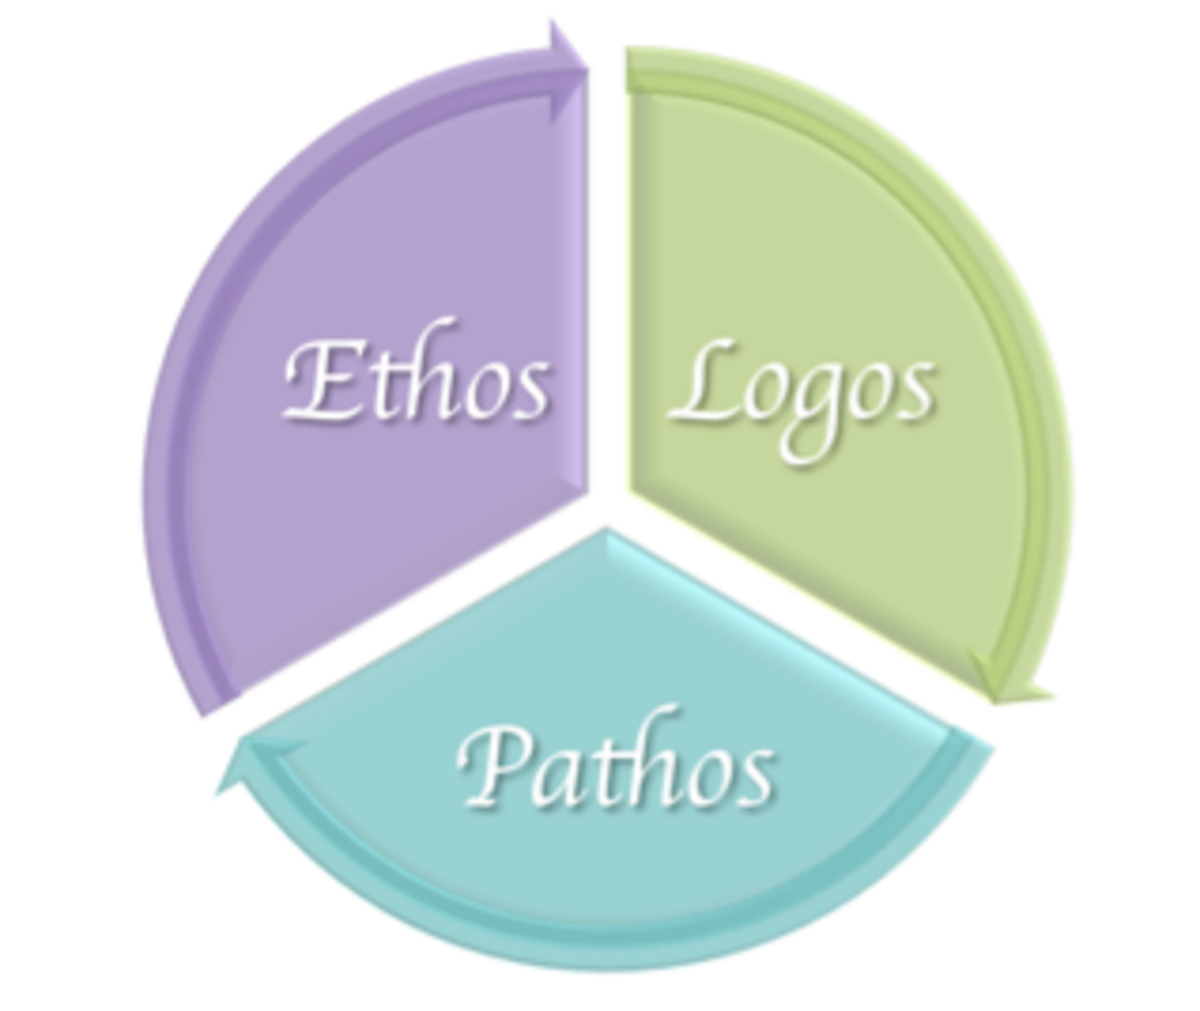 Read on to learn about ethos, pathos, and logos.